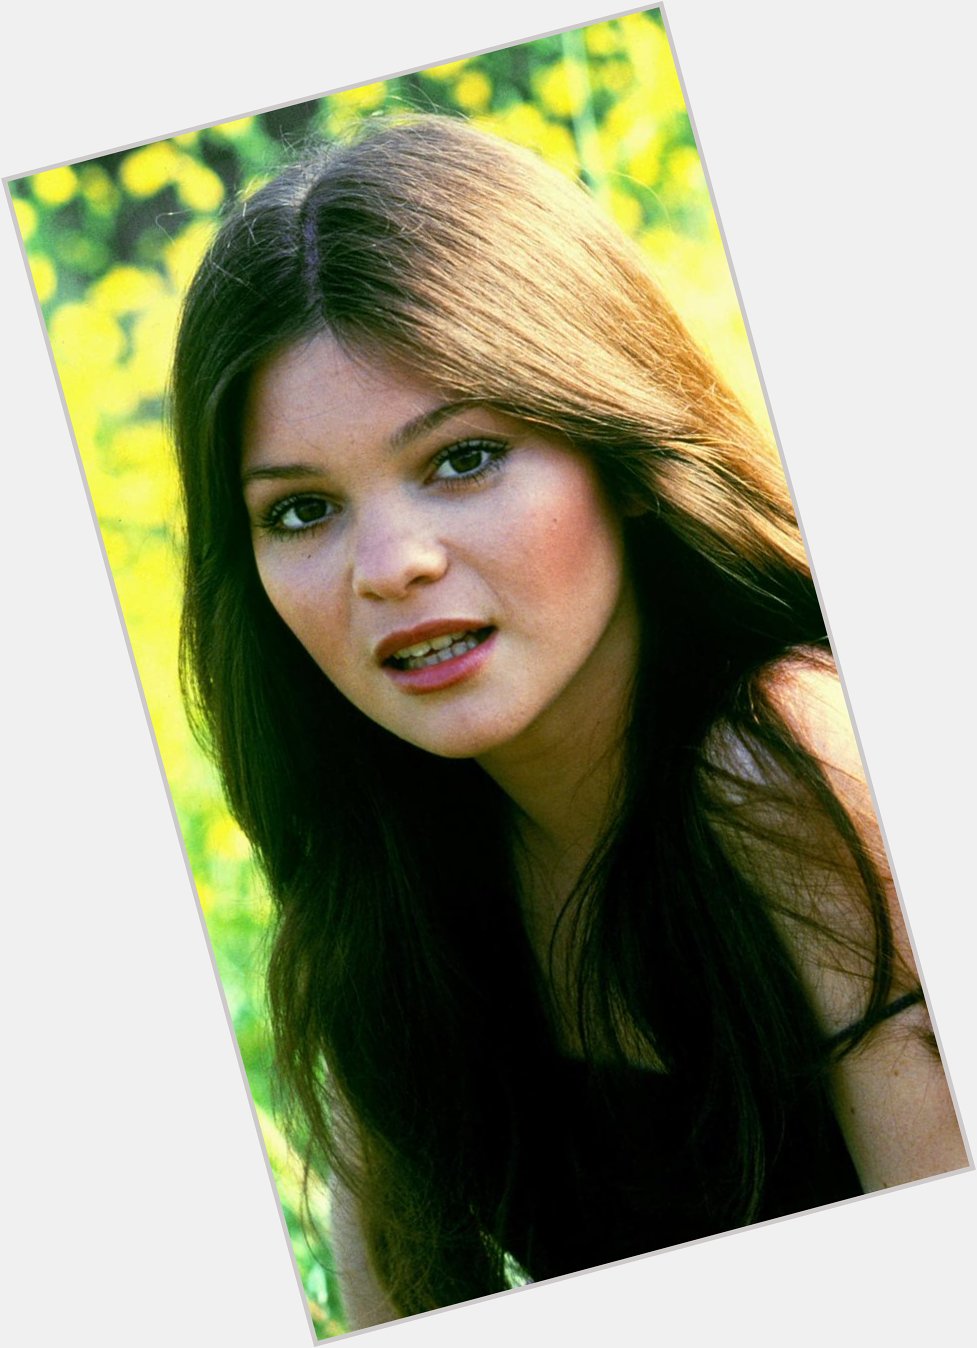 Good morning, Happy Friday. Starting today with a Happy Birthday to VALERIE BERTINELLI 